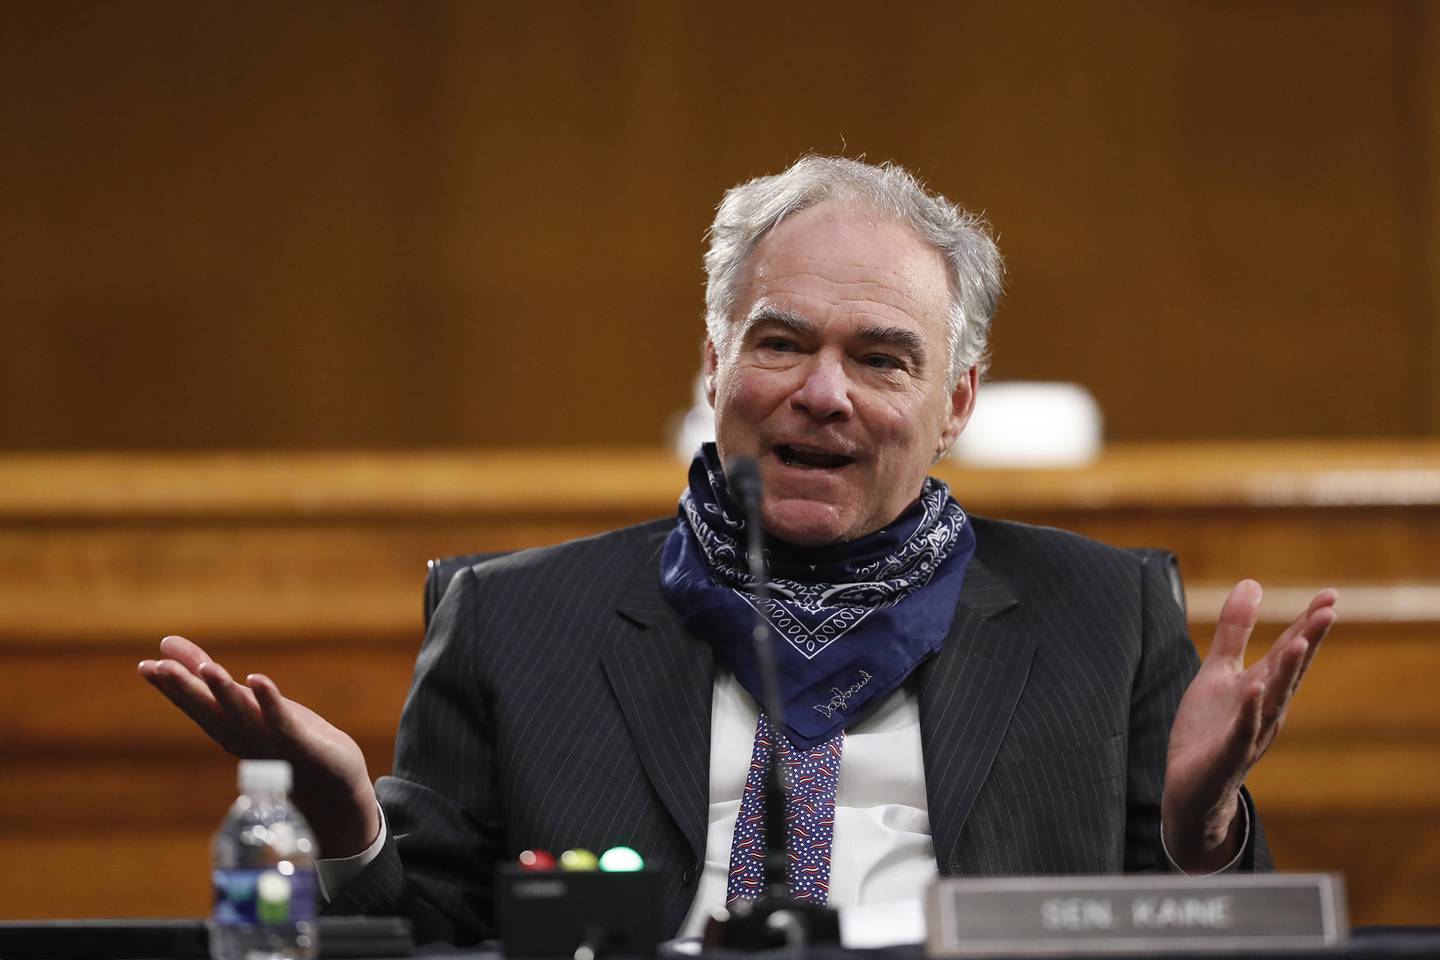 Sen. Tim Kaine, D-Va., speaks during a Senate Health Education Labor and Pensions Committee hearing on new coronavirus tests on Capitol Hill